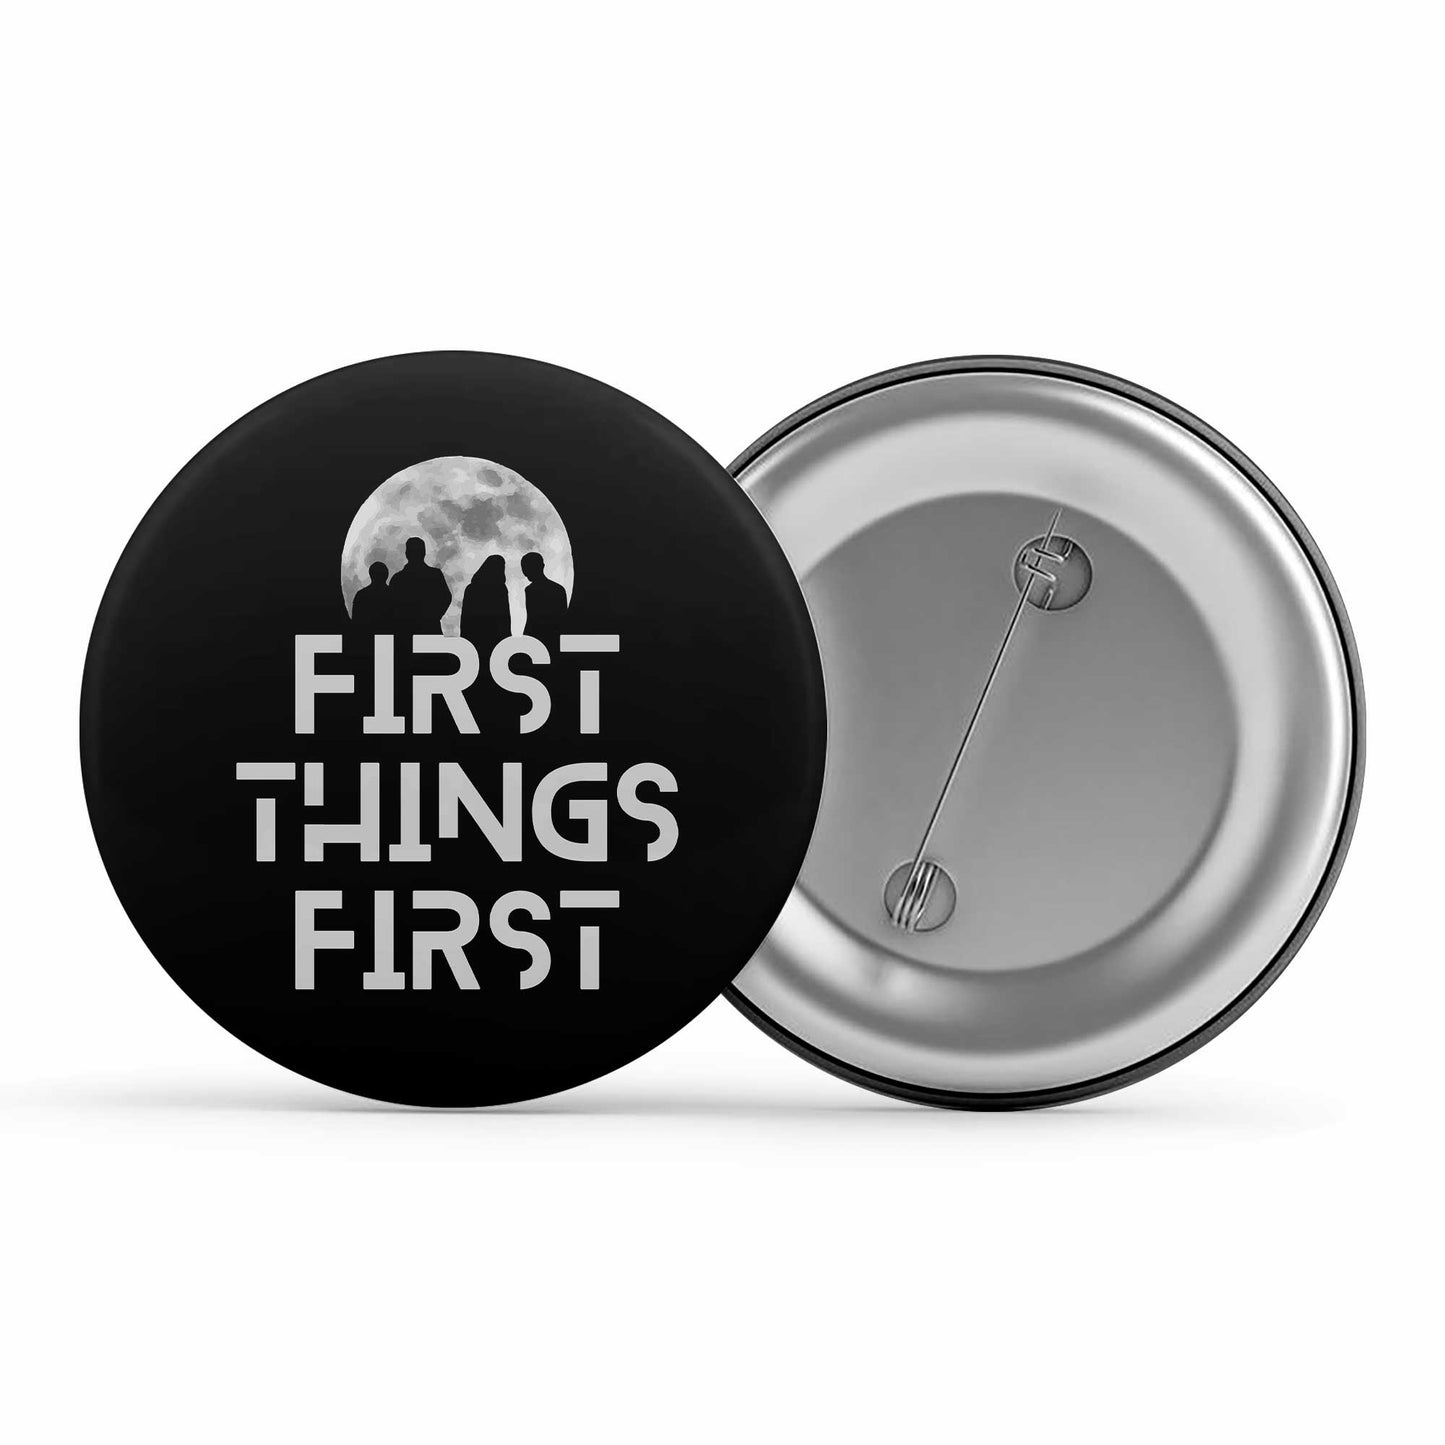 imagine dragons first things first badge pin button music band buy online india the banyan tee tbt men women girls boys unisex  believer